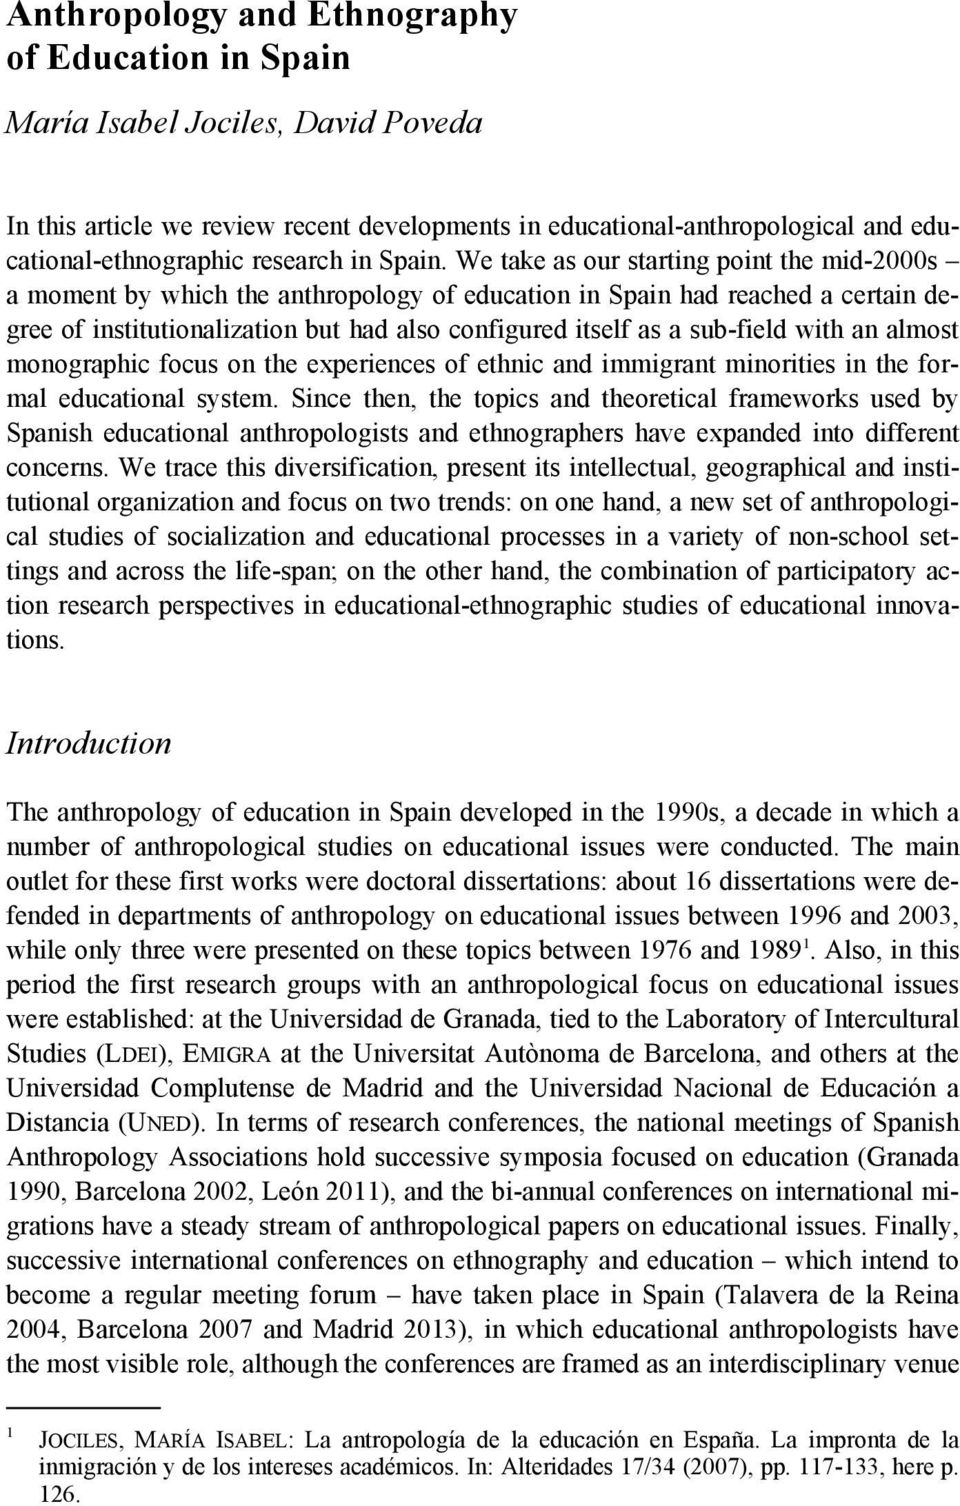 We take as our starting point the mid-2000s a moment by which the anthropology of education in Spain had reached a certain degree of institutionalization but had also configured itself as a sub-field